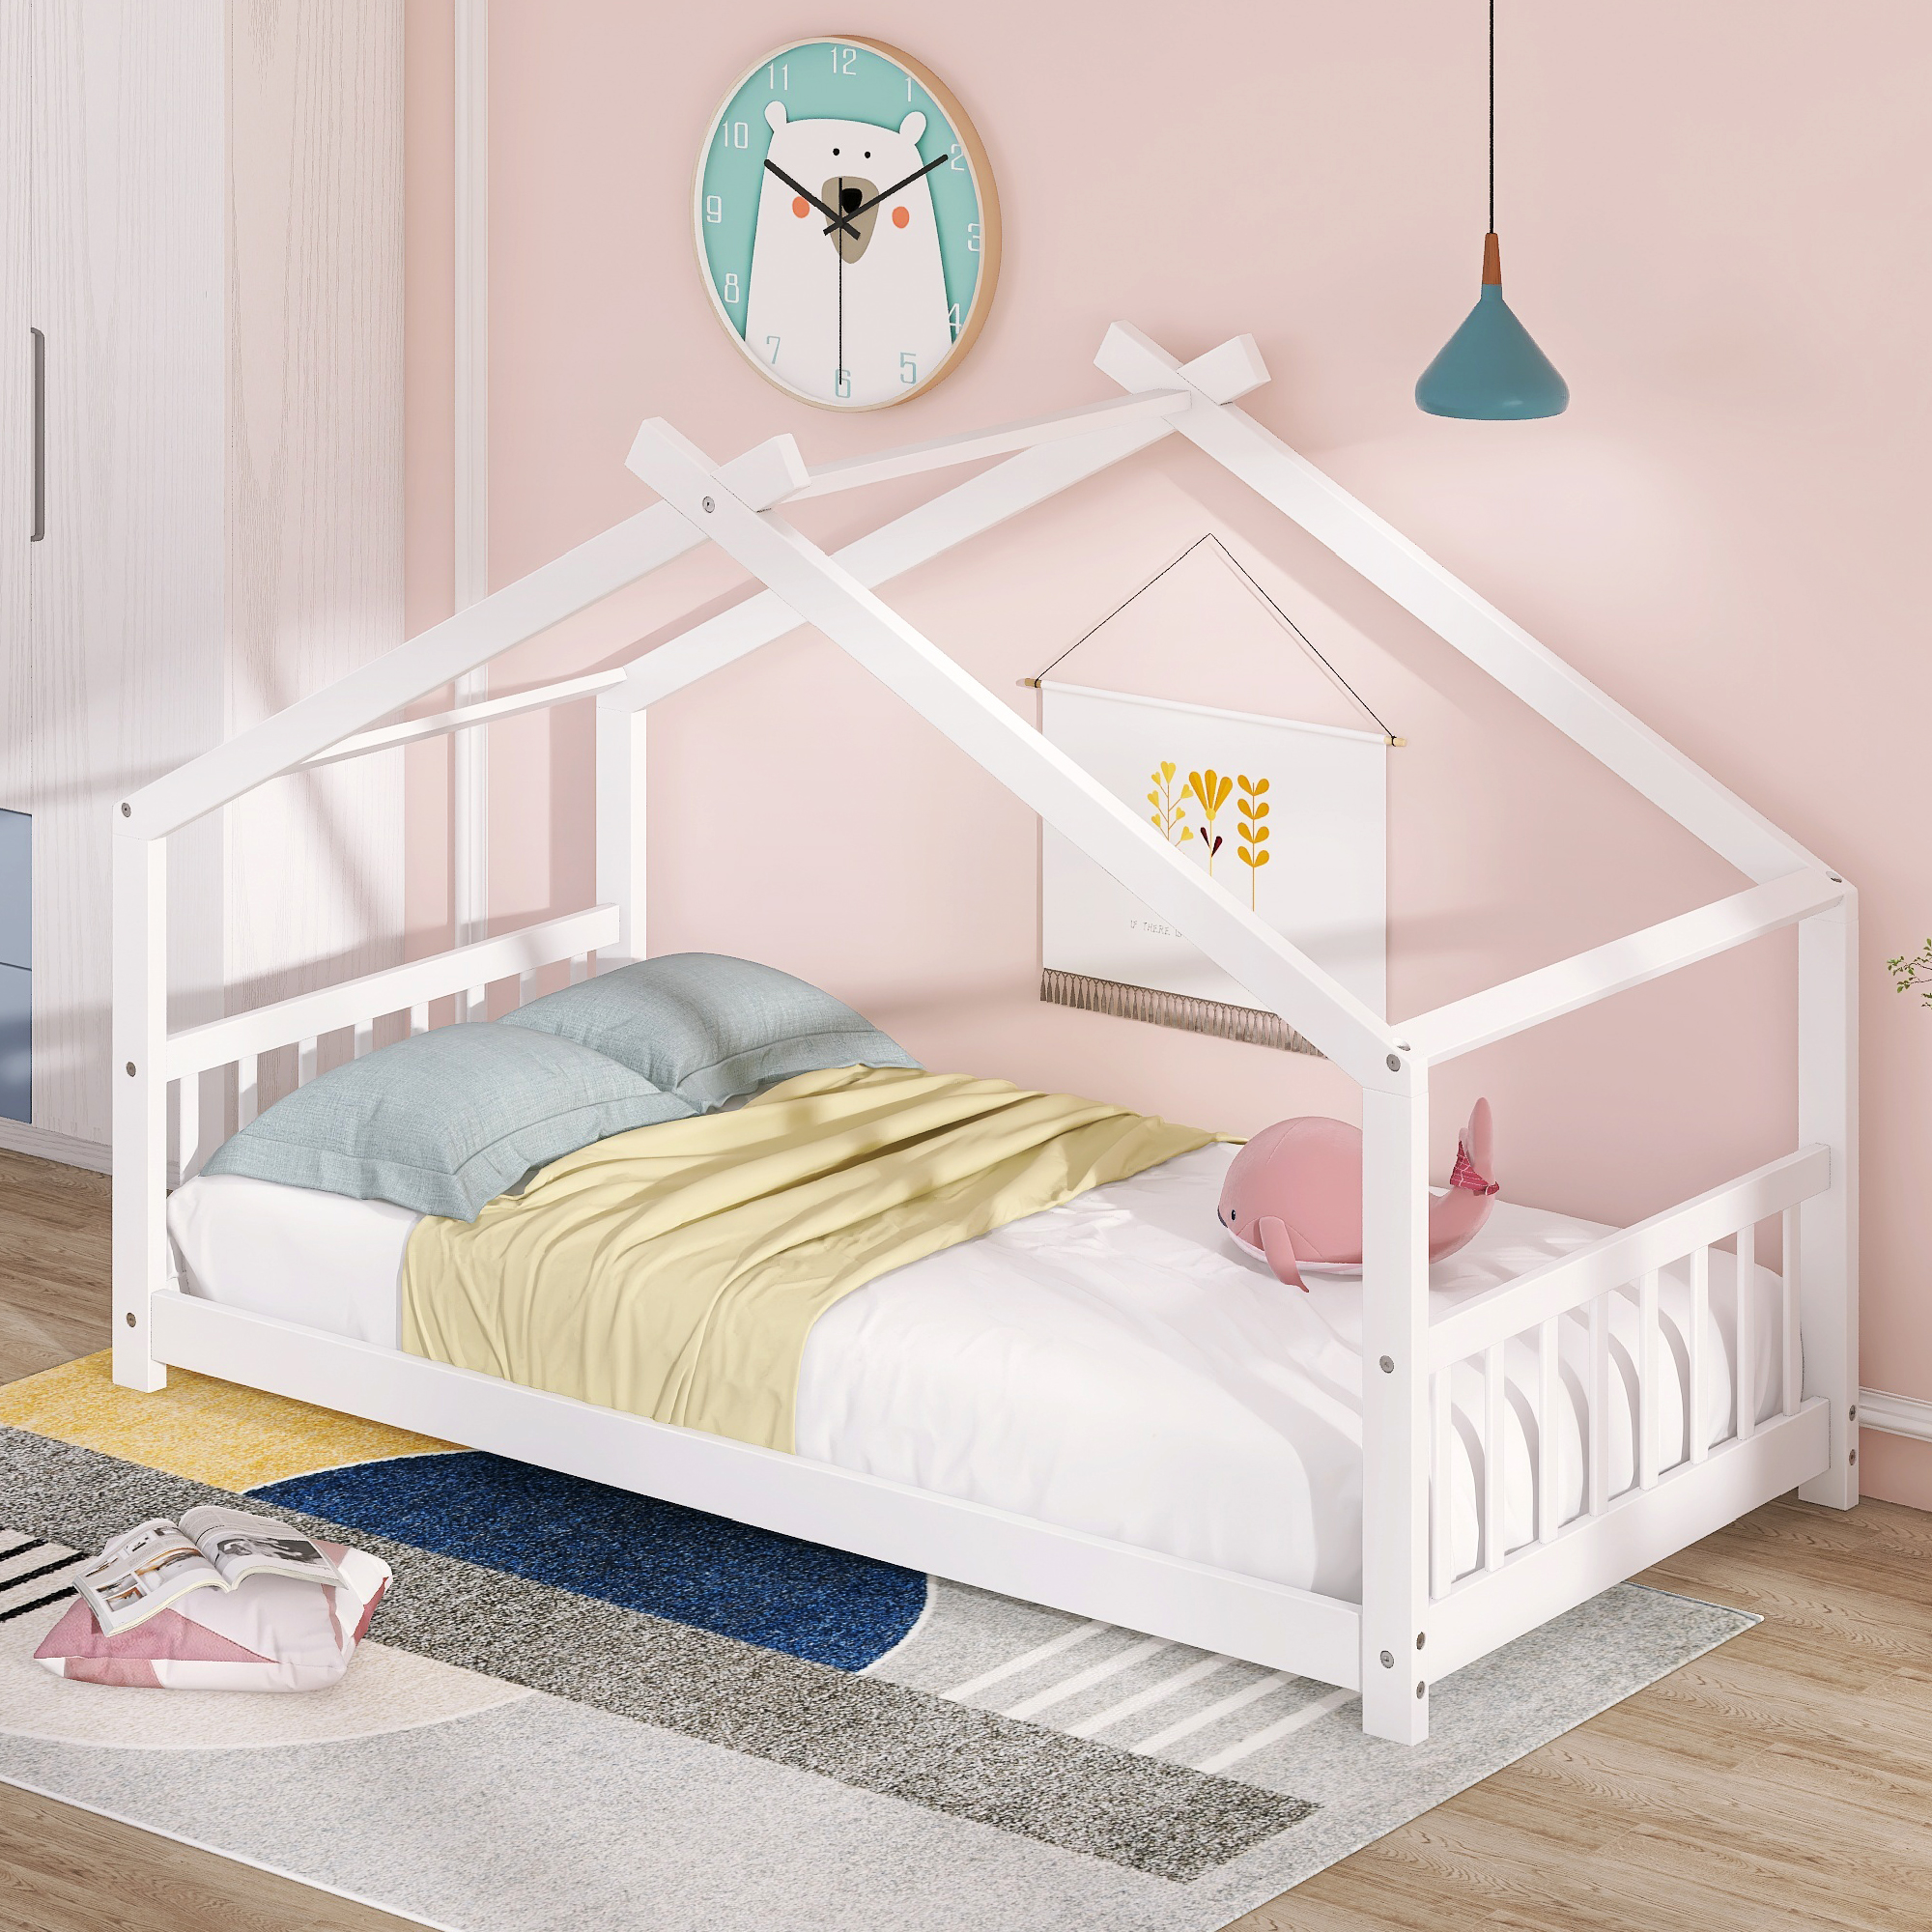 Twin Size House Bed Wood Bed White